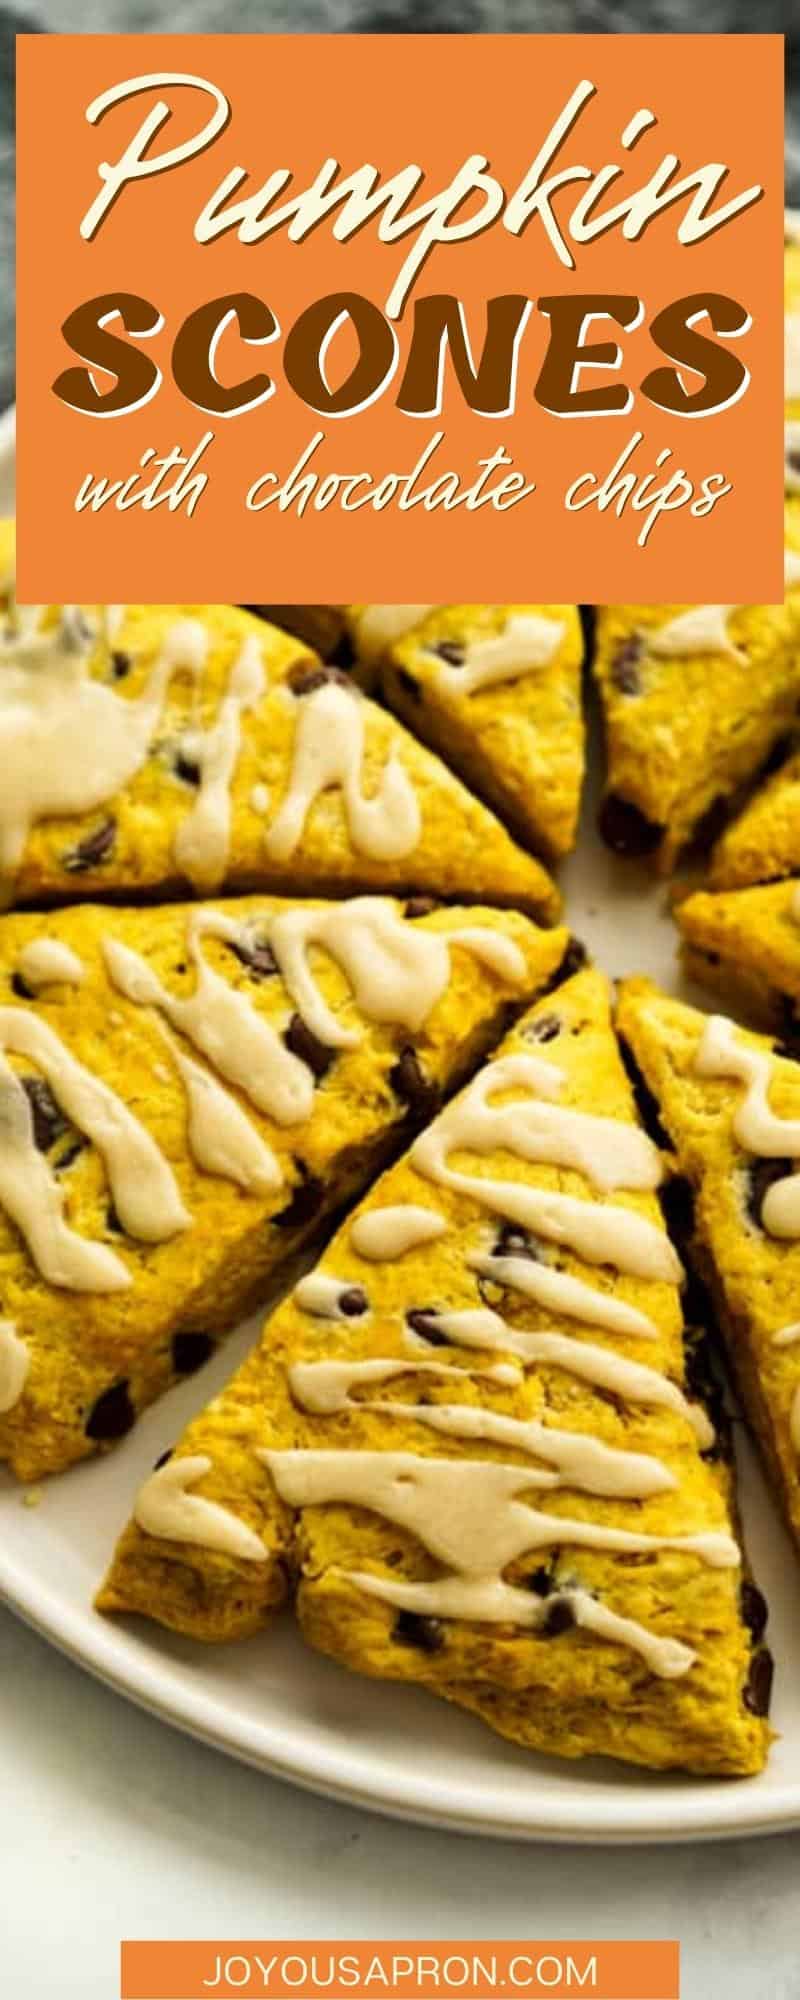 Pumpkin Chocolate Chip Scones - moist and crumbly pumpkin scones filled with chocolate chips and topped with a sweet maple glaze. The perfect Fall pastry! via @joyousapron